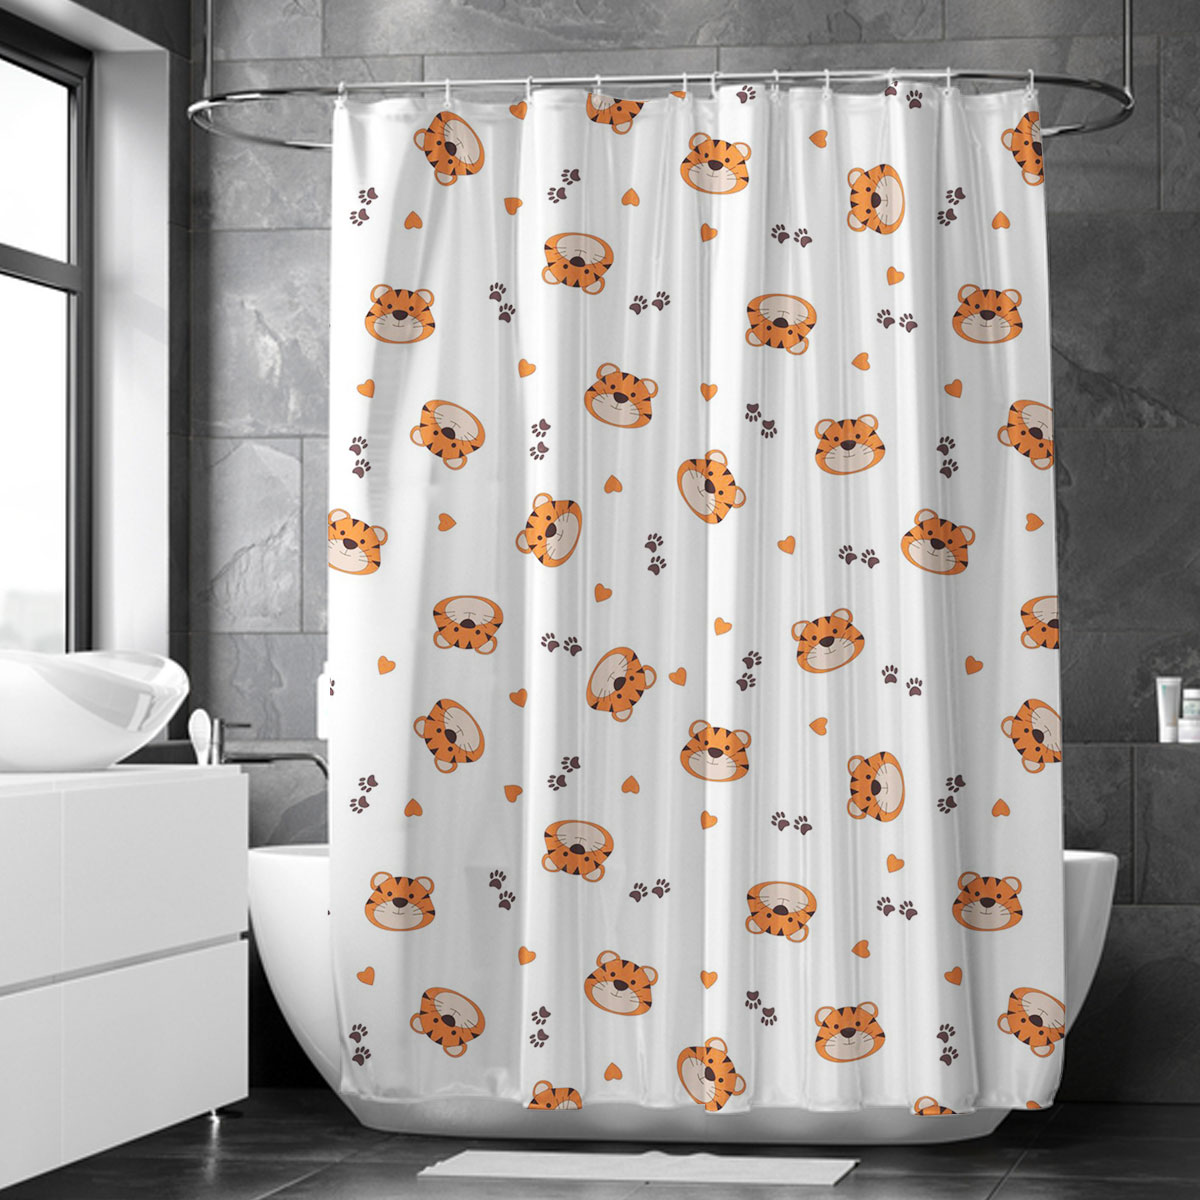 Tiger Heart And Paw Shower Curtain 6